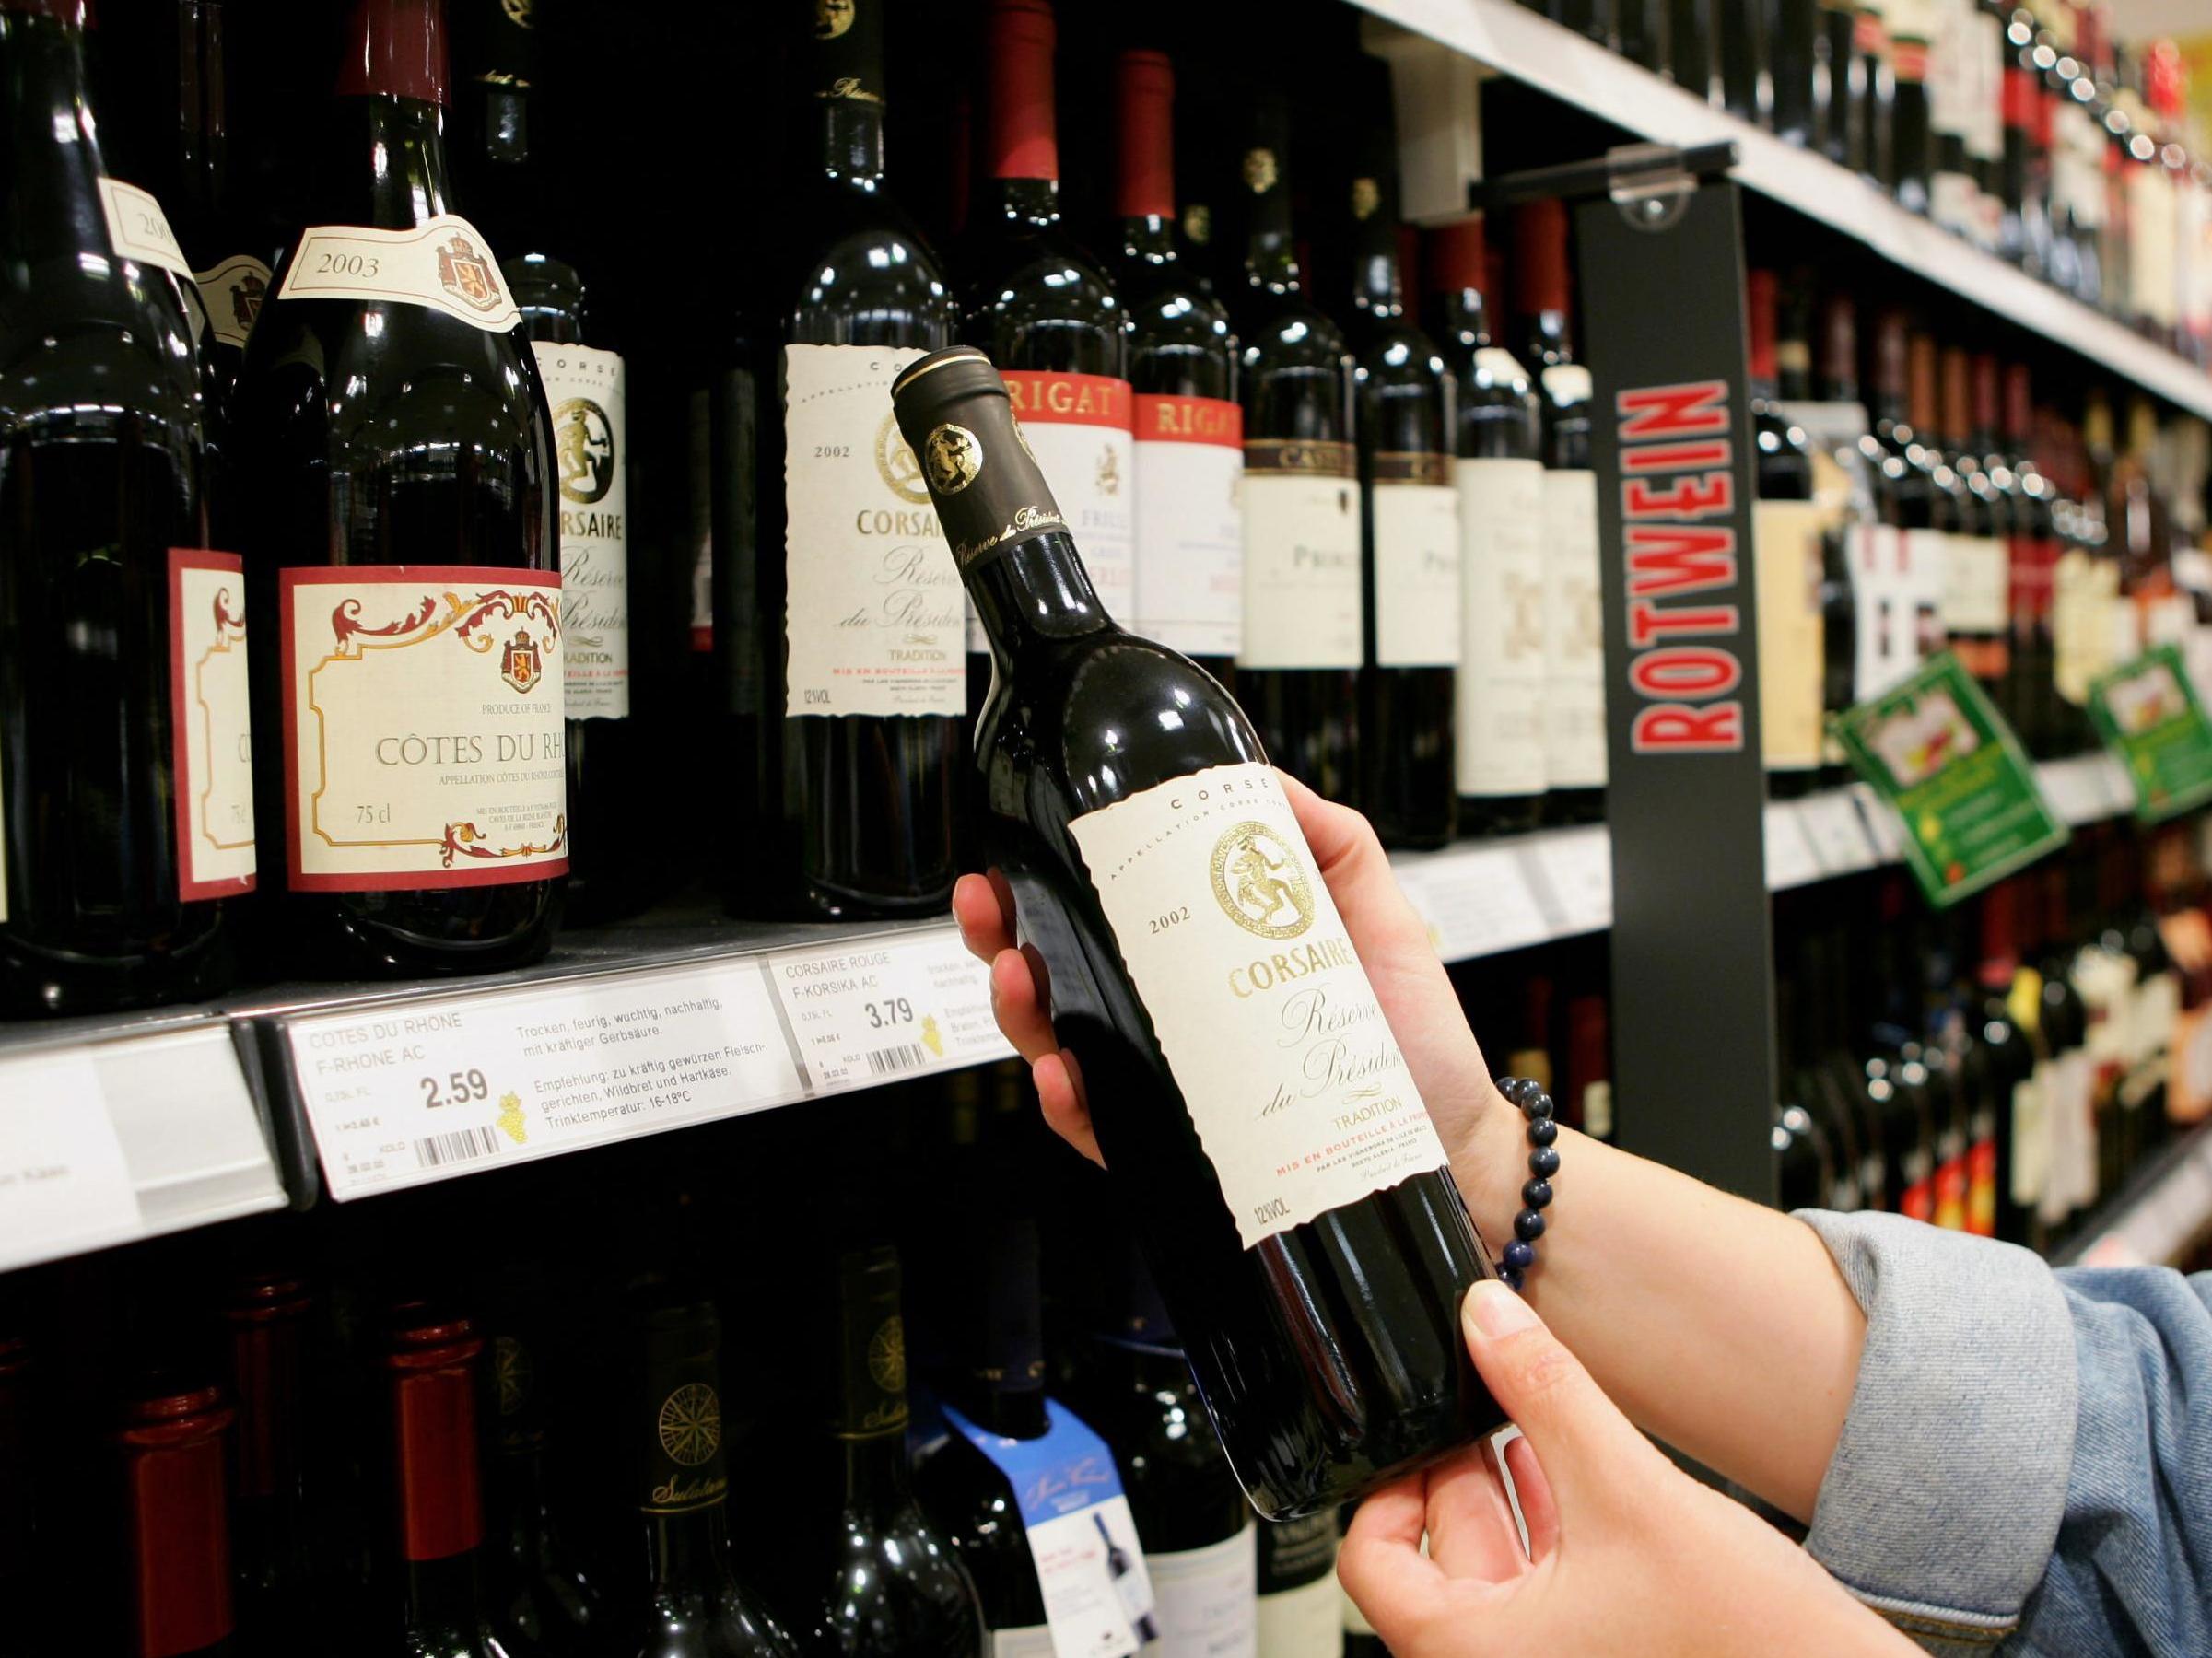 A number of supermarket shelves have been picked clean of wine